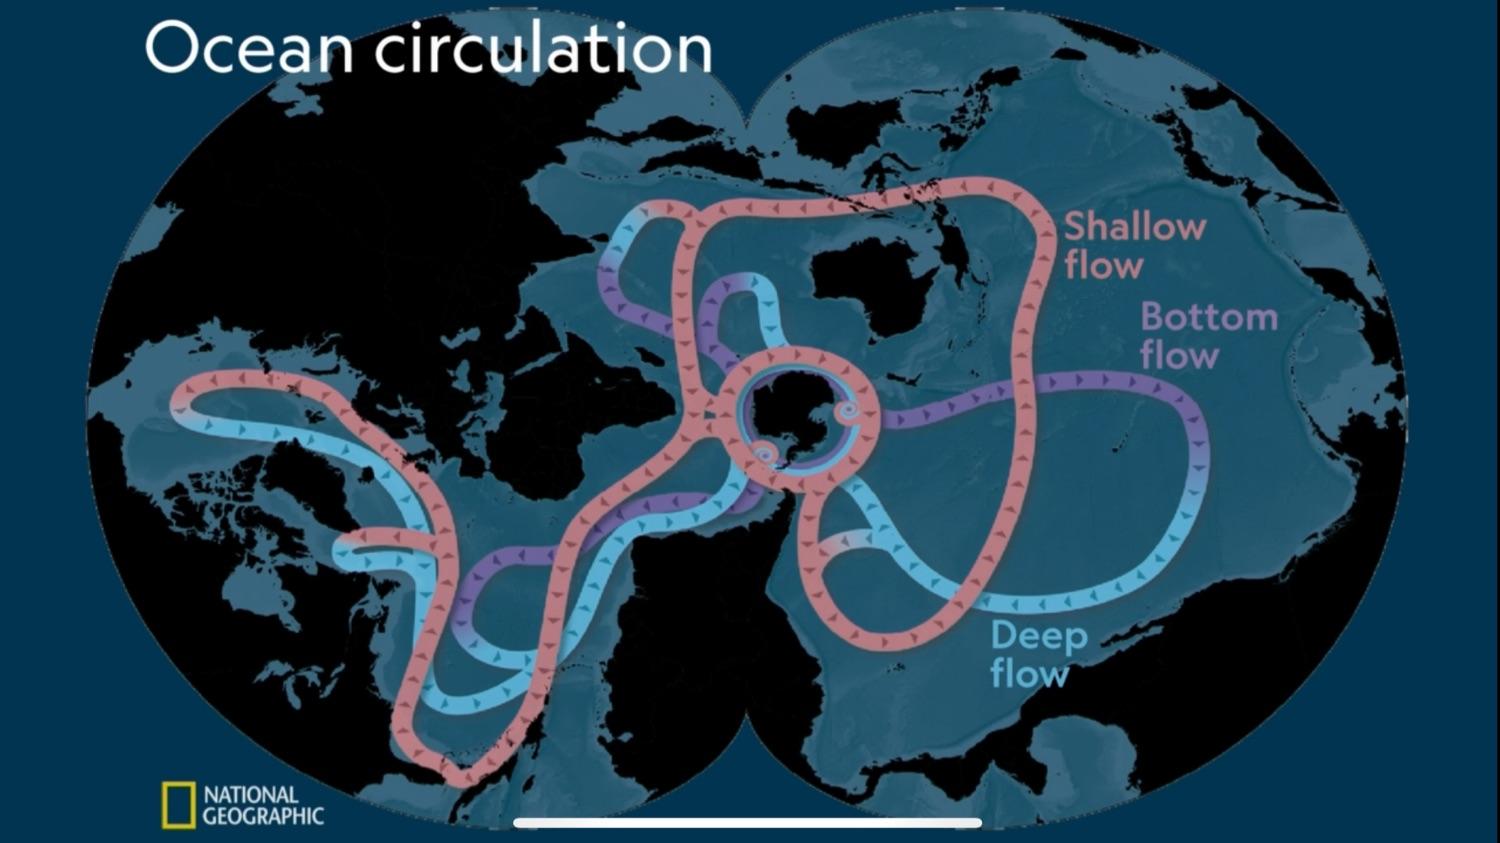 How the ACC defines the Southern Ocean